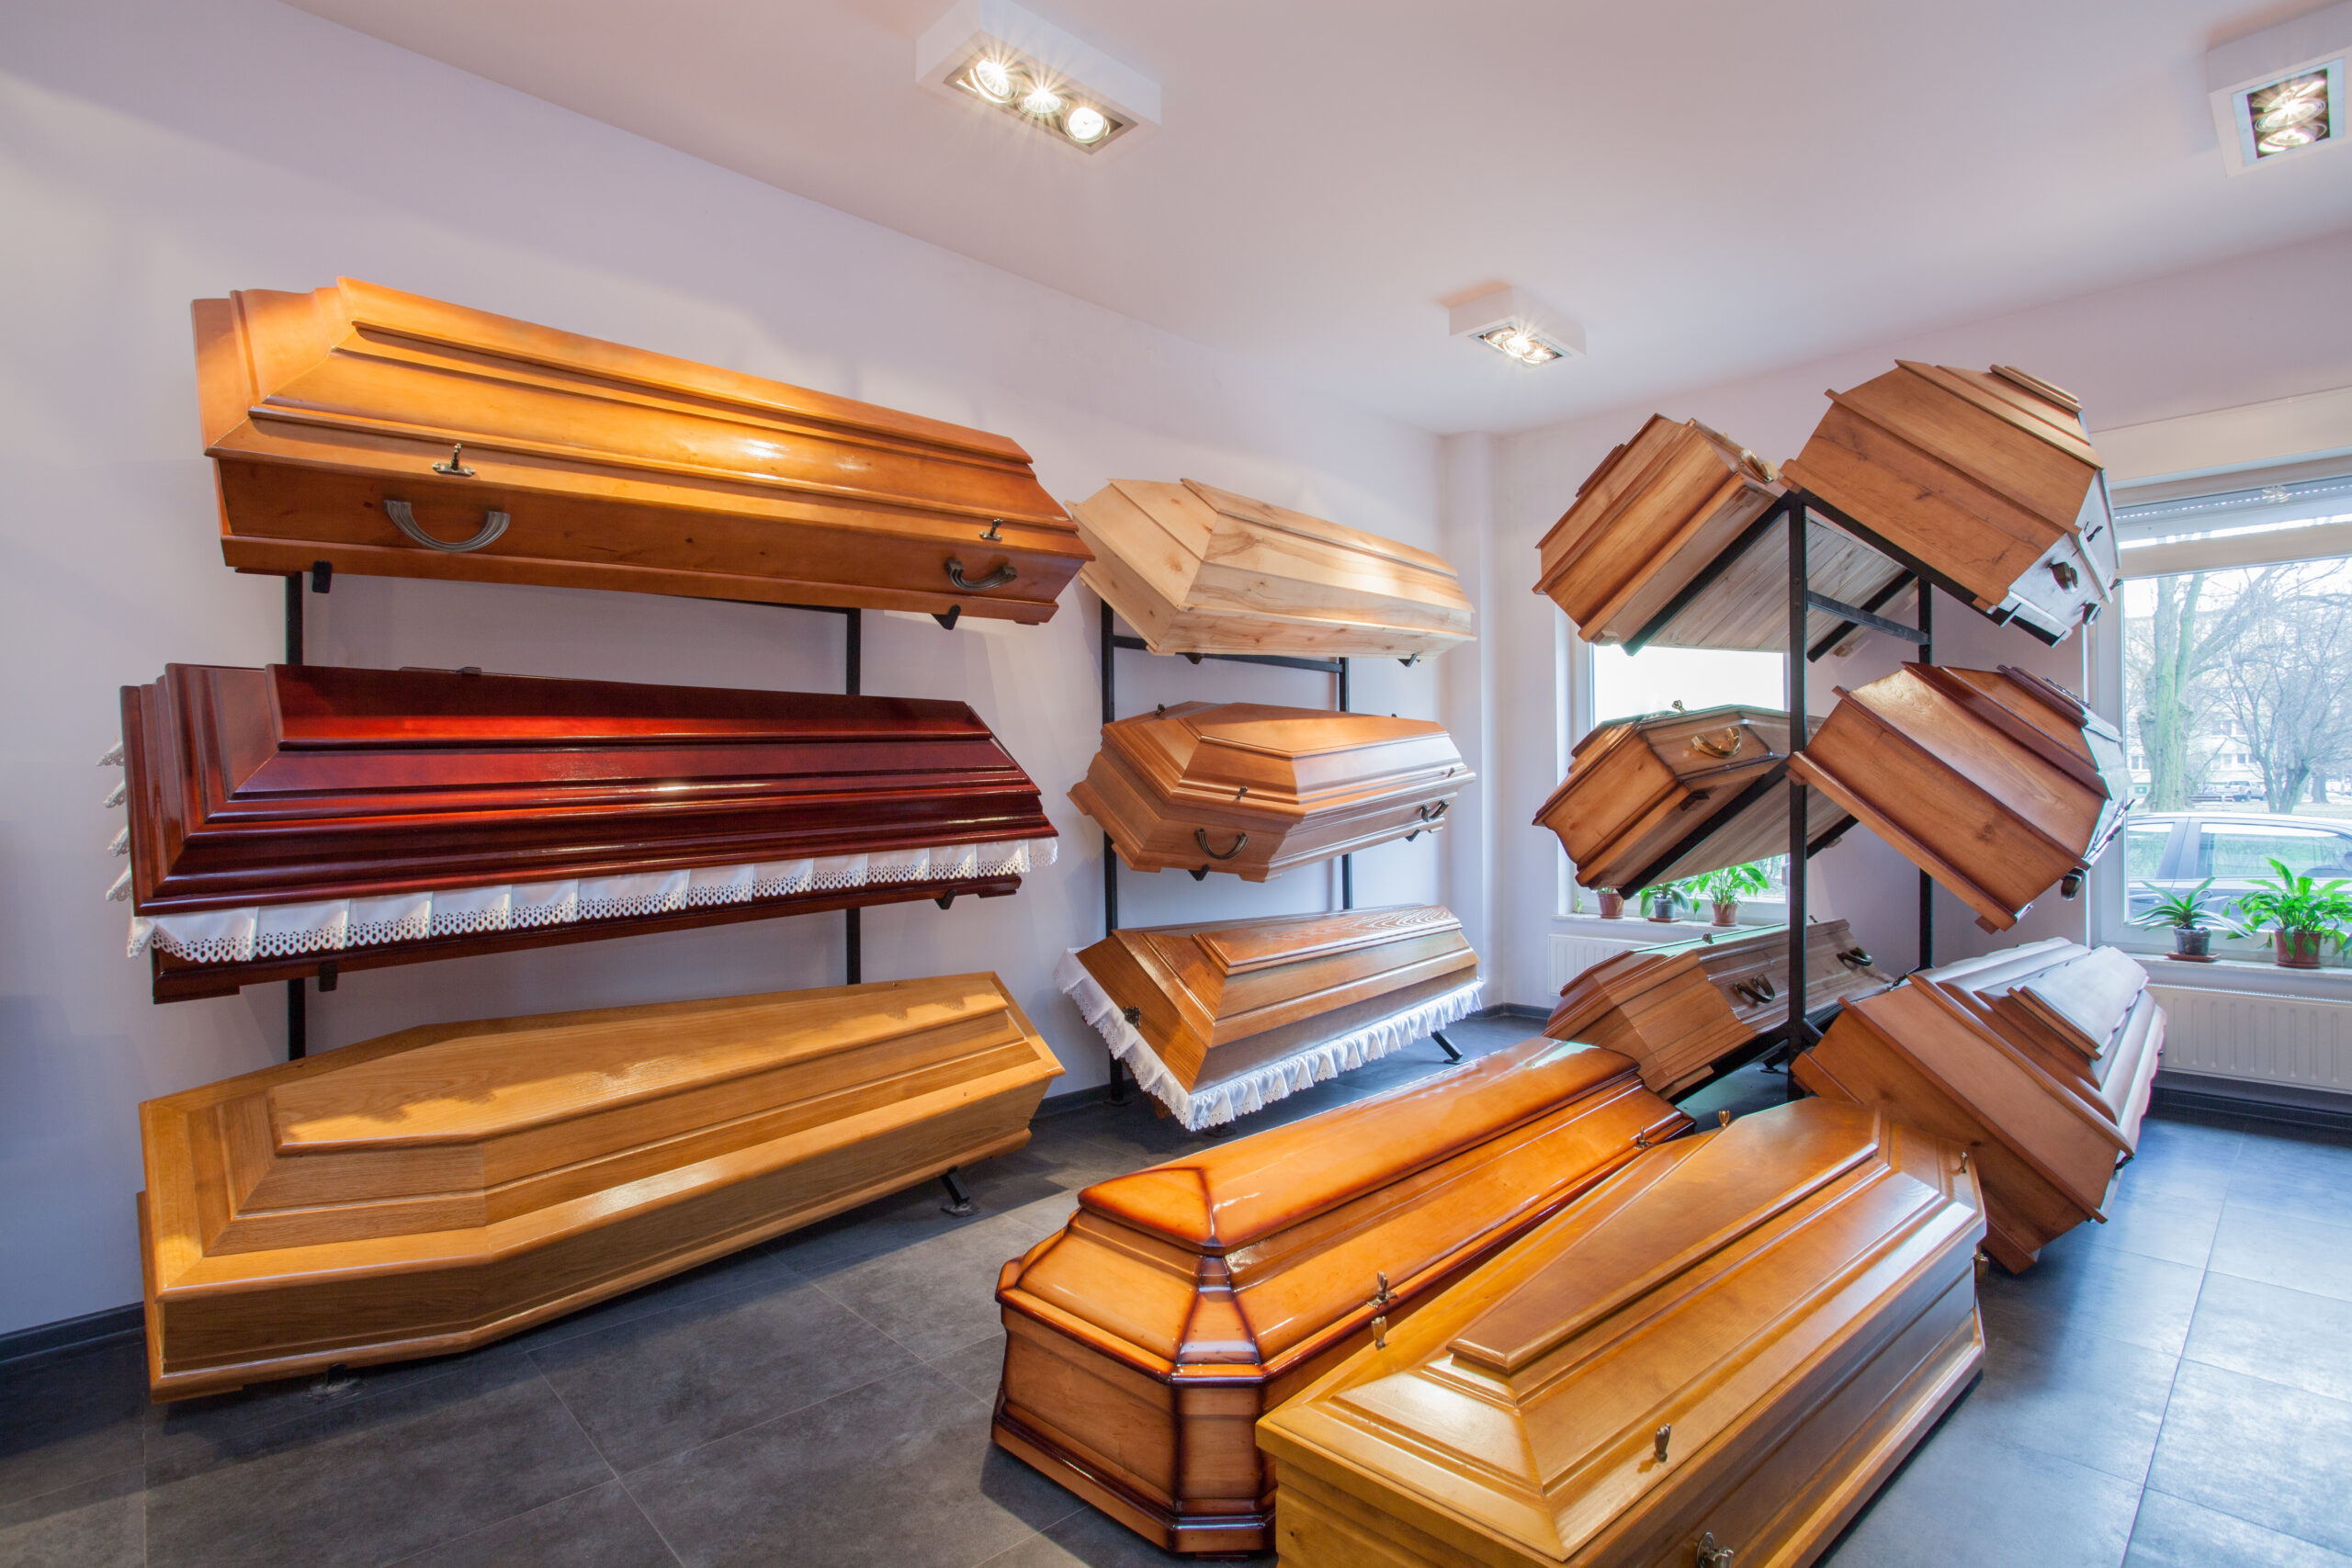 Wooden brown coffins in a funeral home